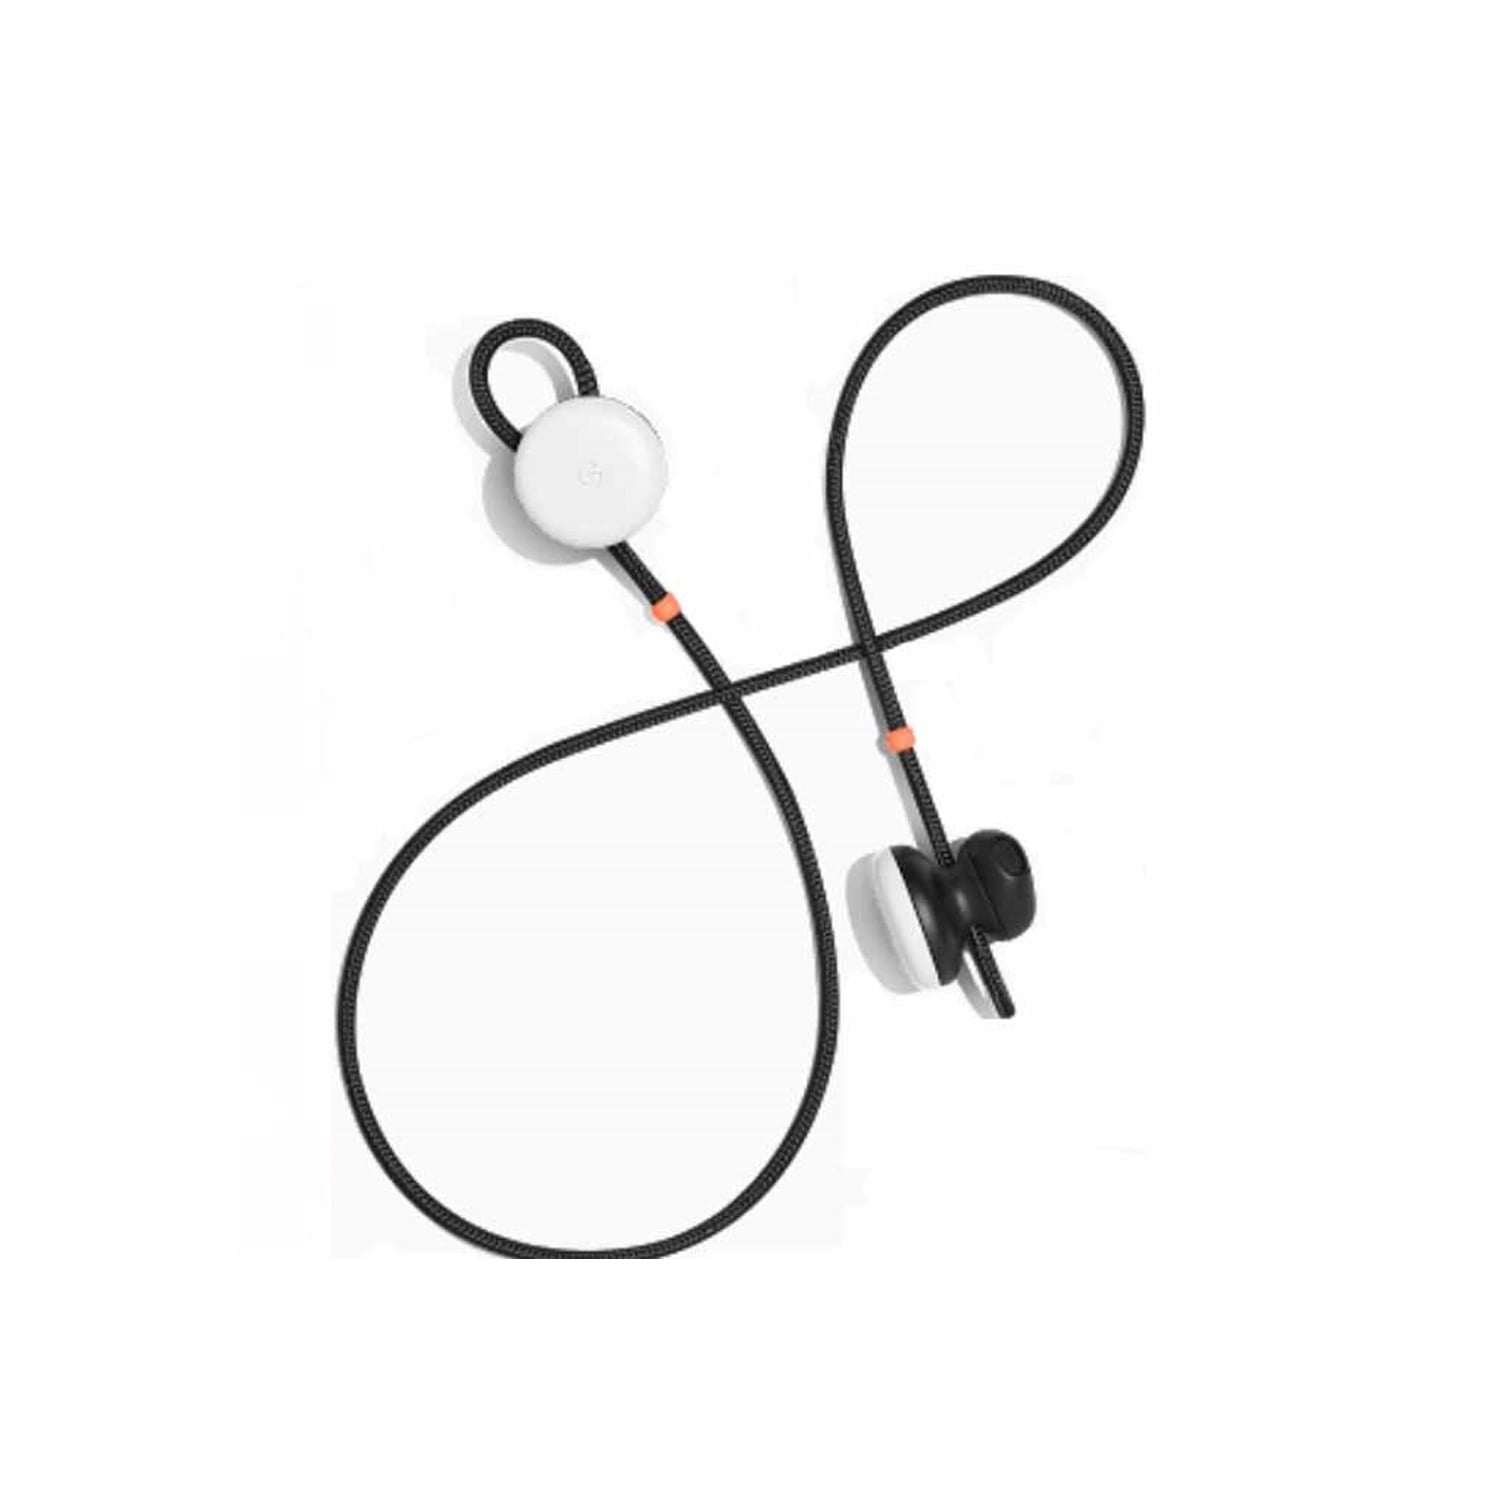 New Google Pixel Buds Bluetooth Wireless High Quality Noise Cancellation  Earphones - Clearly White